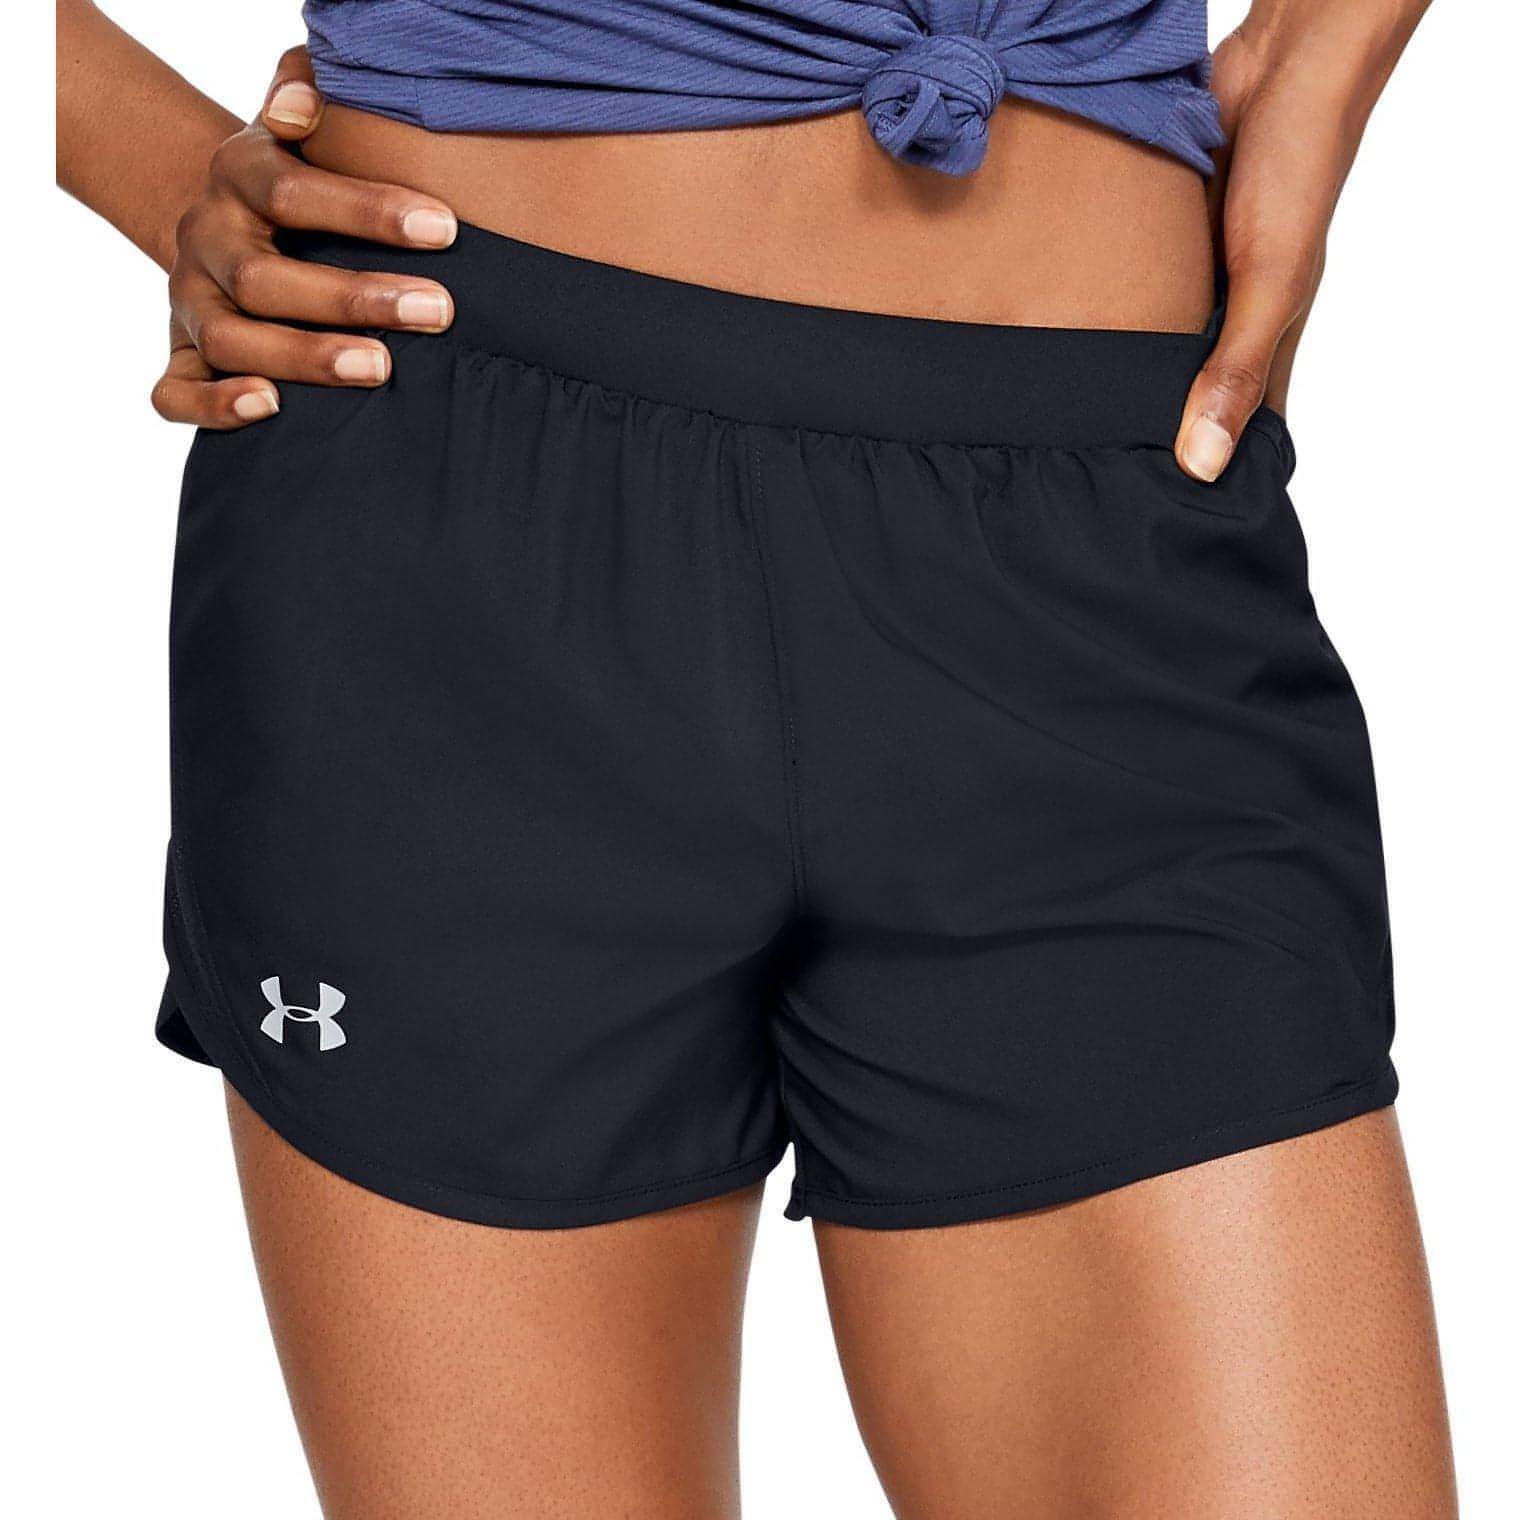 Under Armour Womens Fly By 2.0 Running Shorts - Black